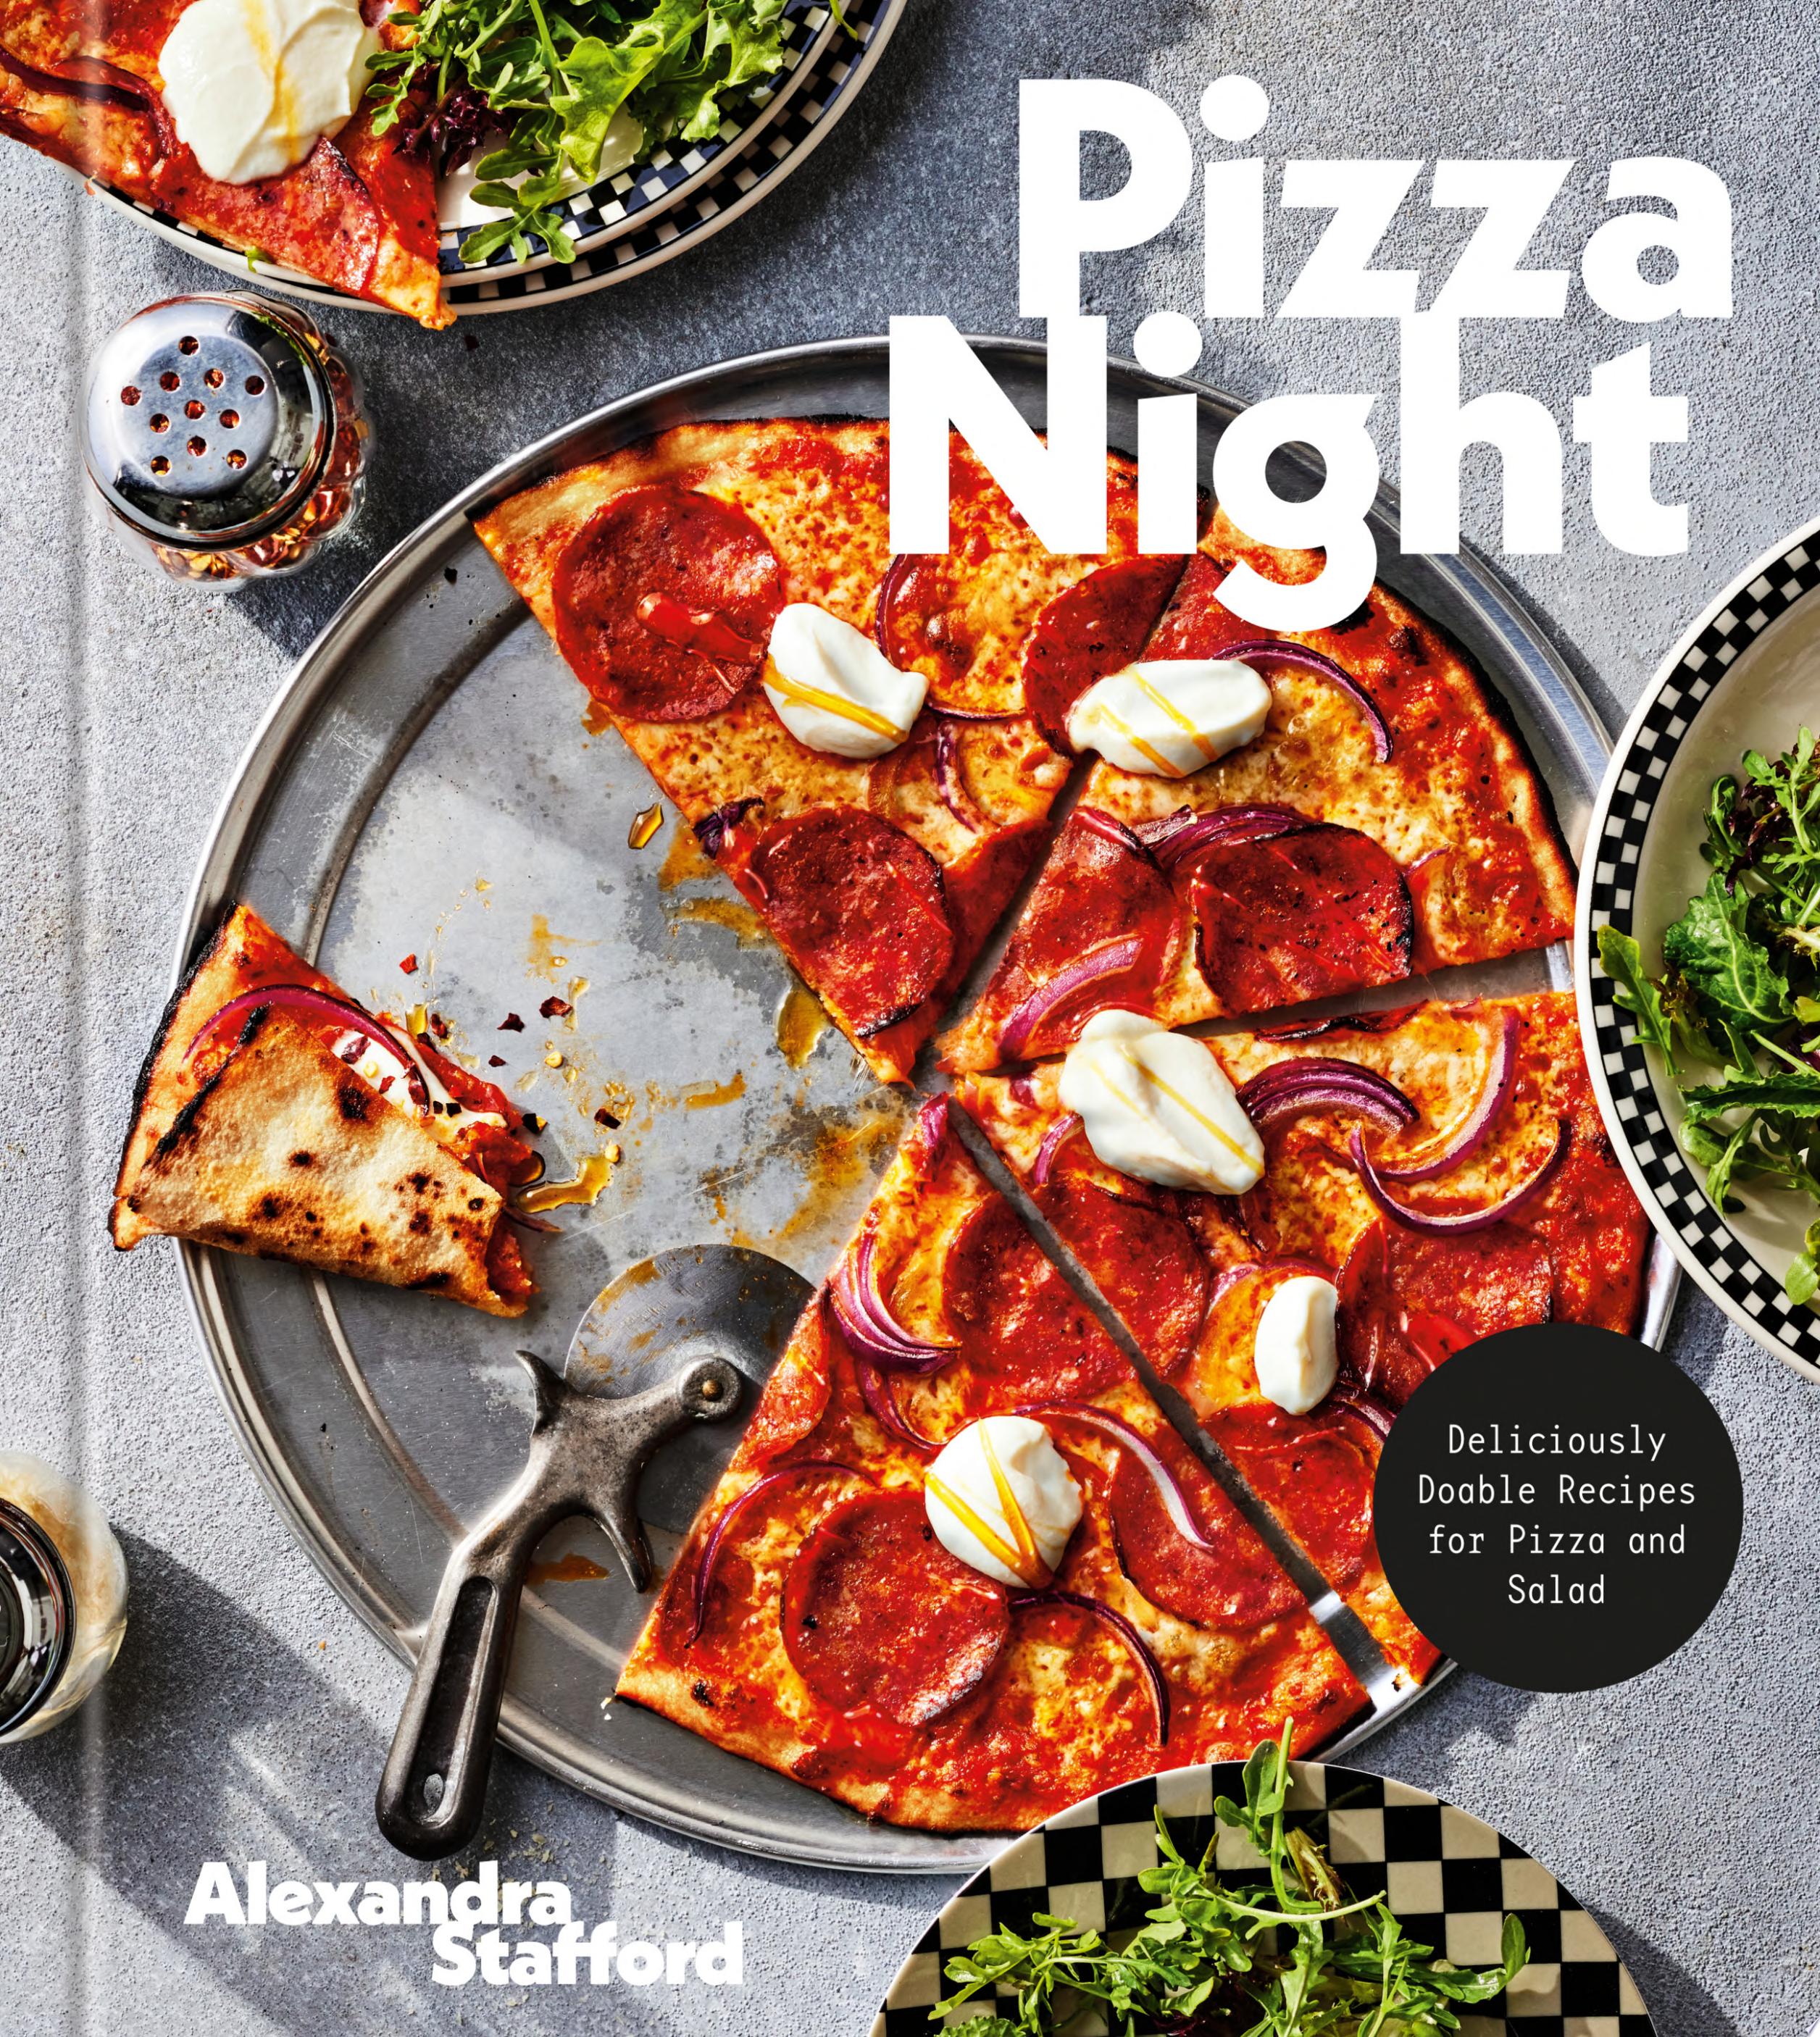 Image for "Pizza Night"